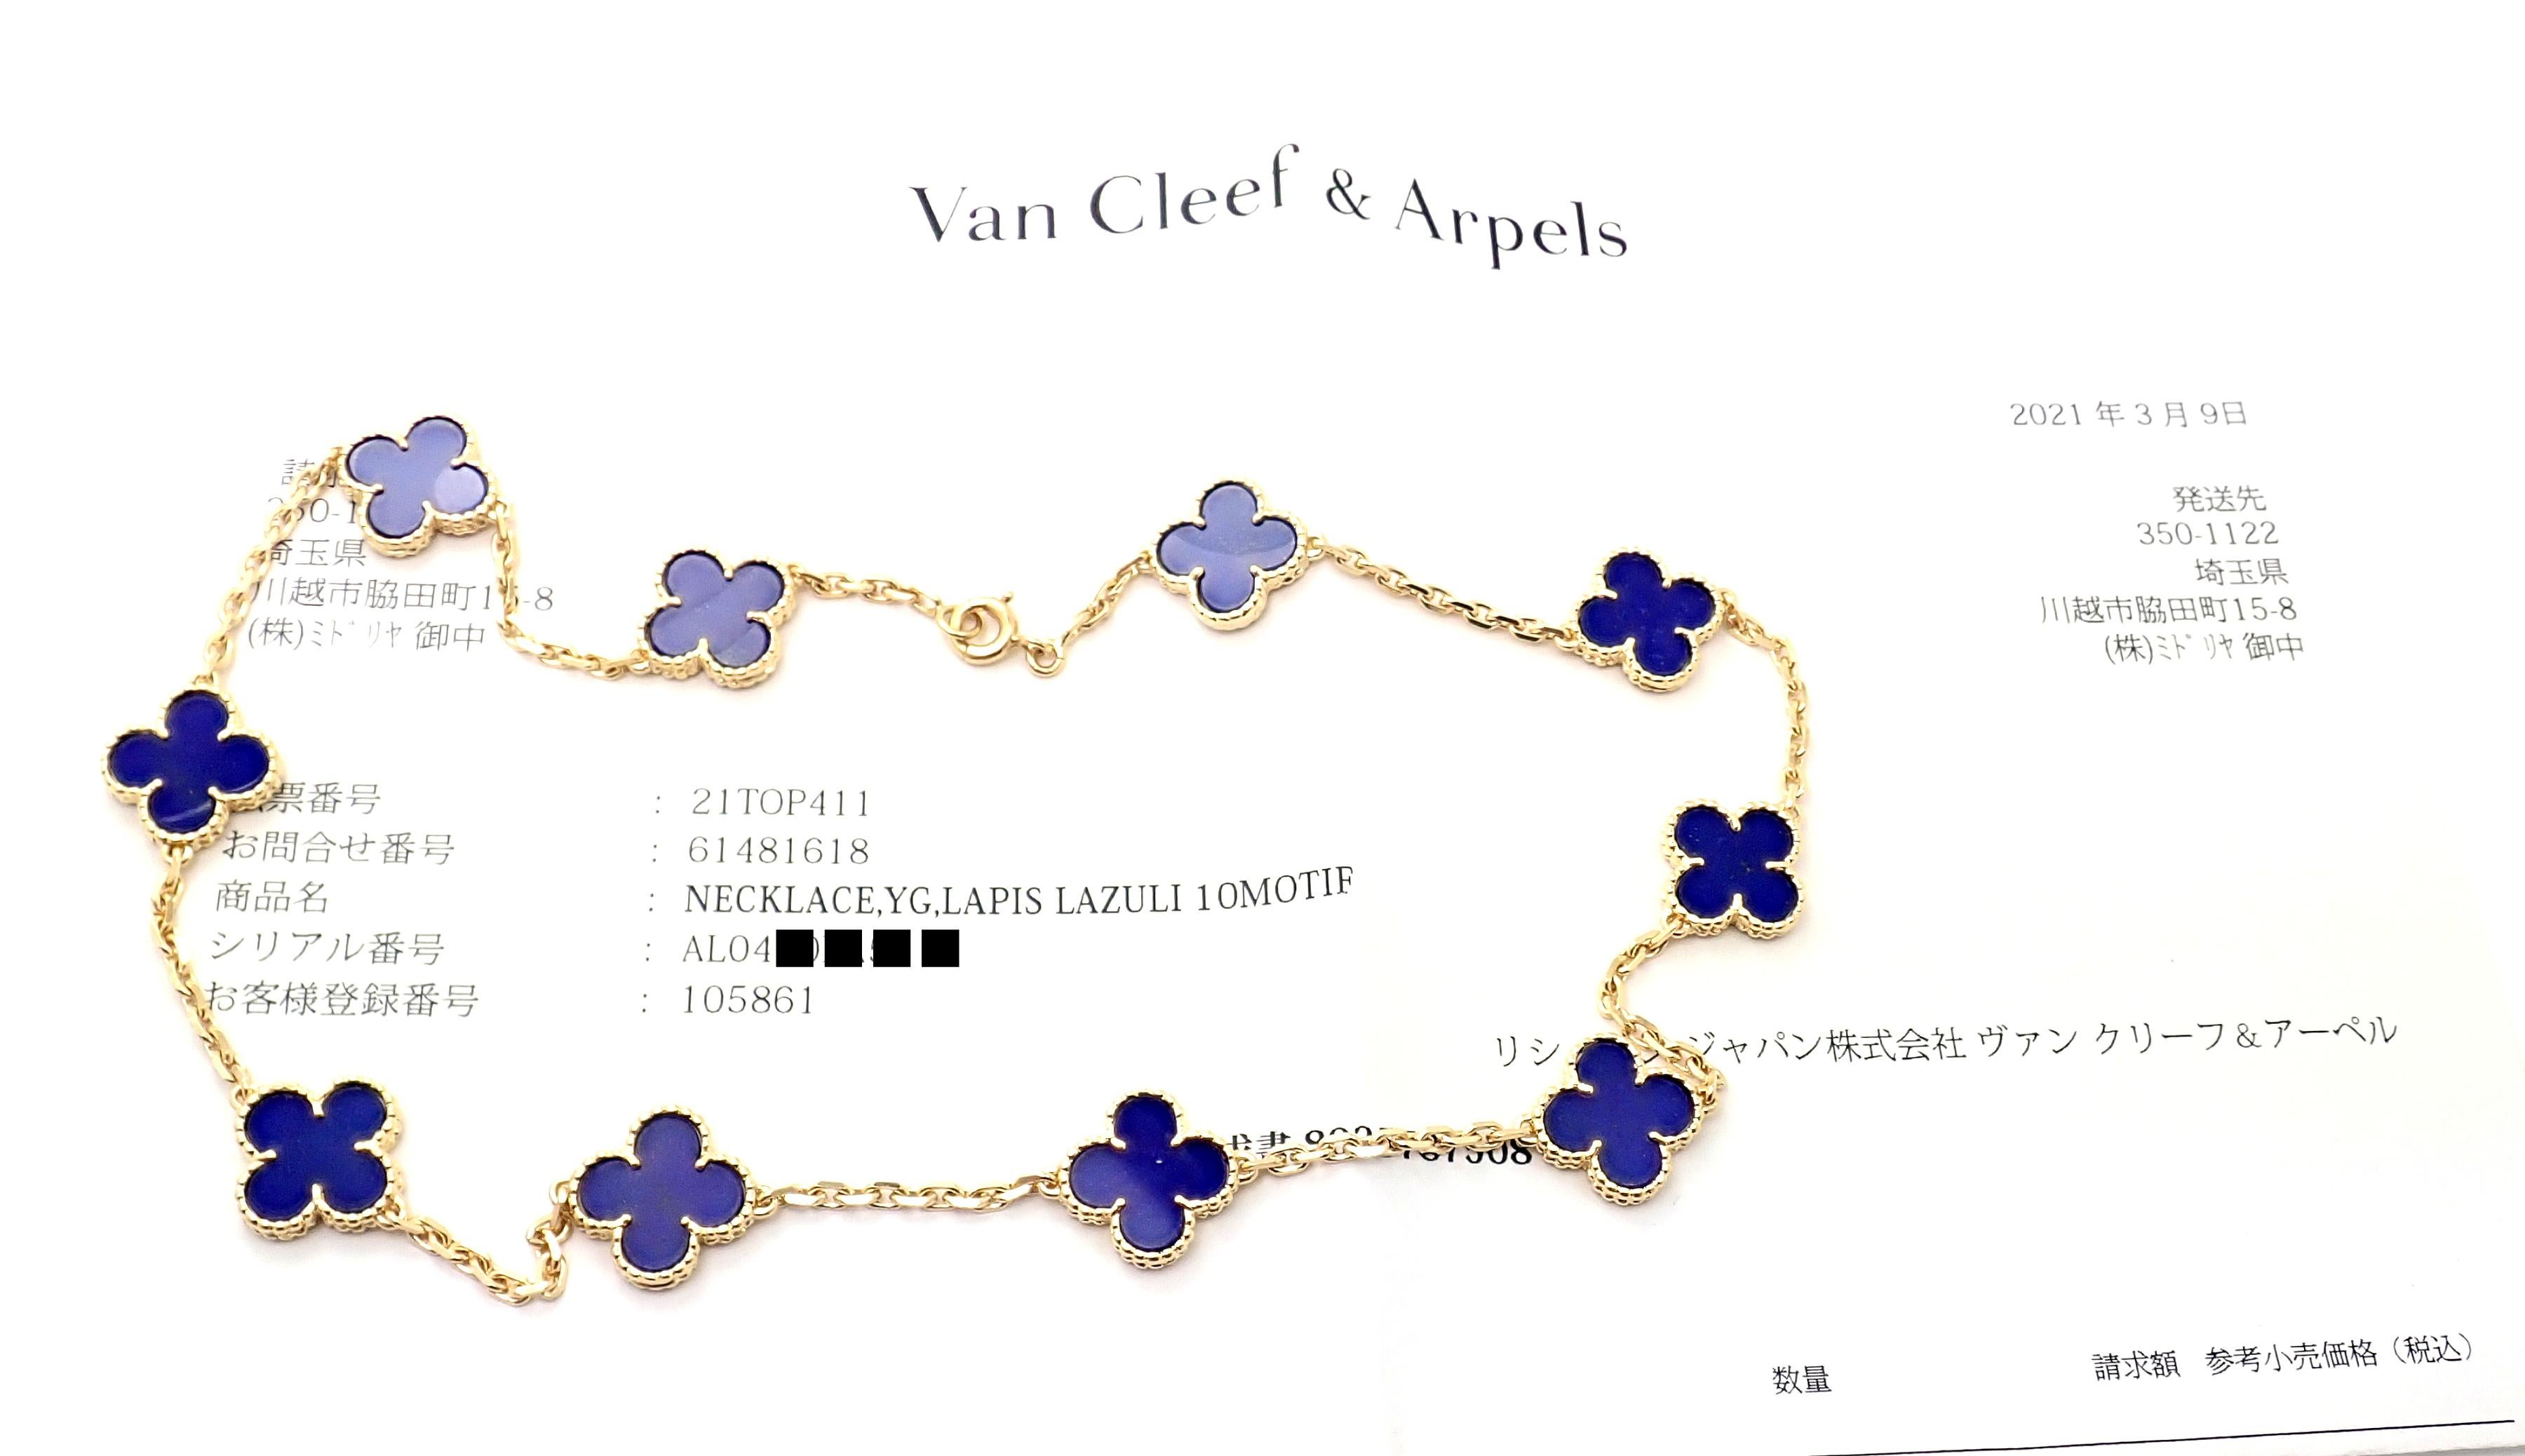 18k Yellow Gold Alhambra 10 Motifs Lapis Lazuli Necklace by 
Van Cleef & Arpels. 
With 10 motifs of Lapis Lazuli Alhambra shape stones 15mm each
*** This is an extremely rare, highly collectible lapis lazuli alhambra necklace by Van Cleef &